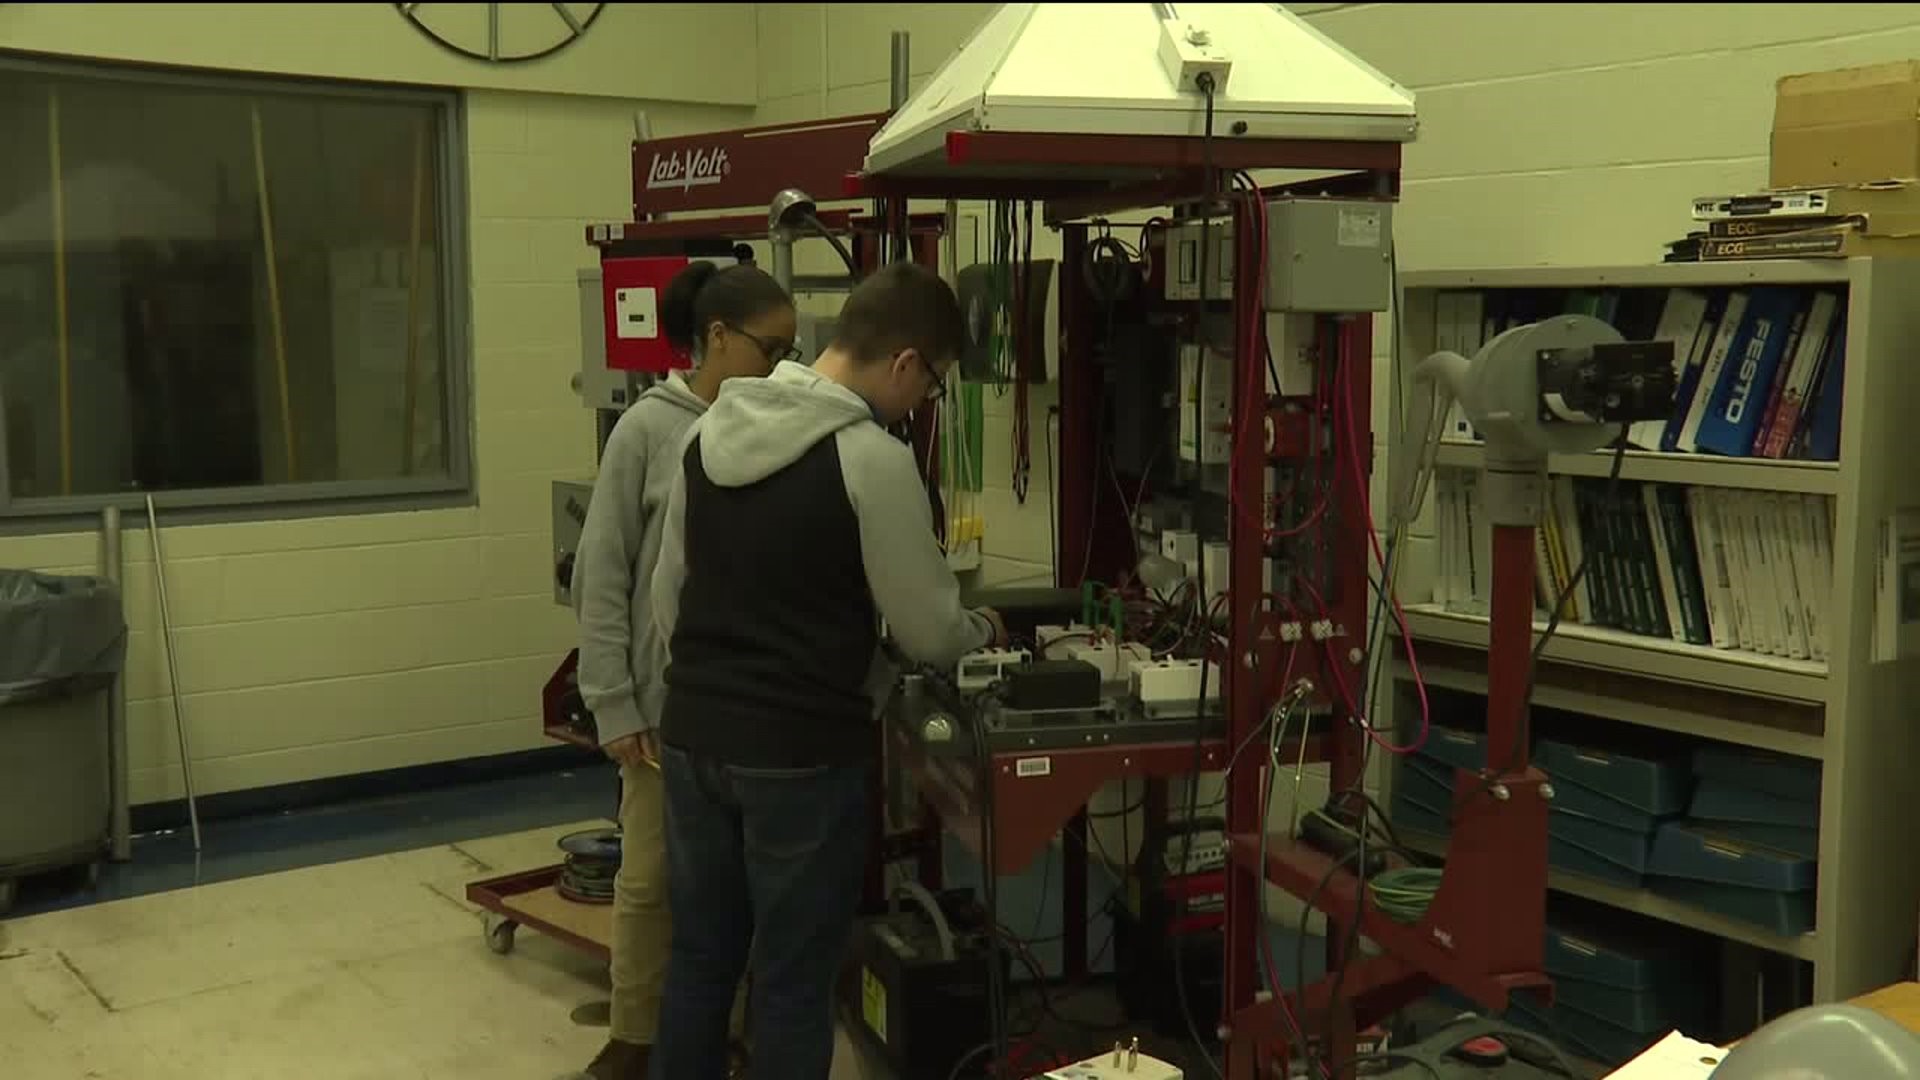 Students in Schuylkill County Learning About Solar Energy